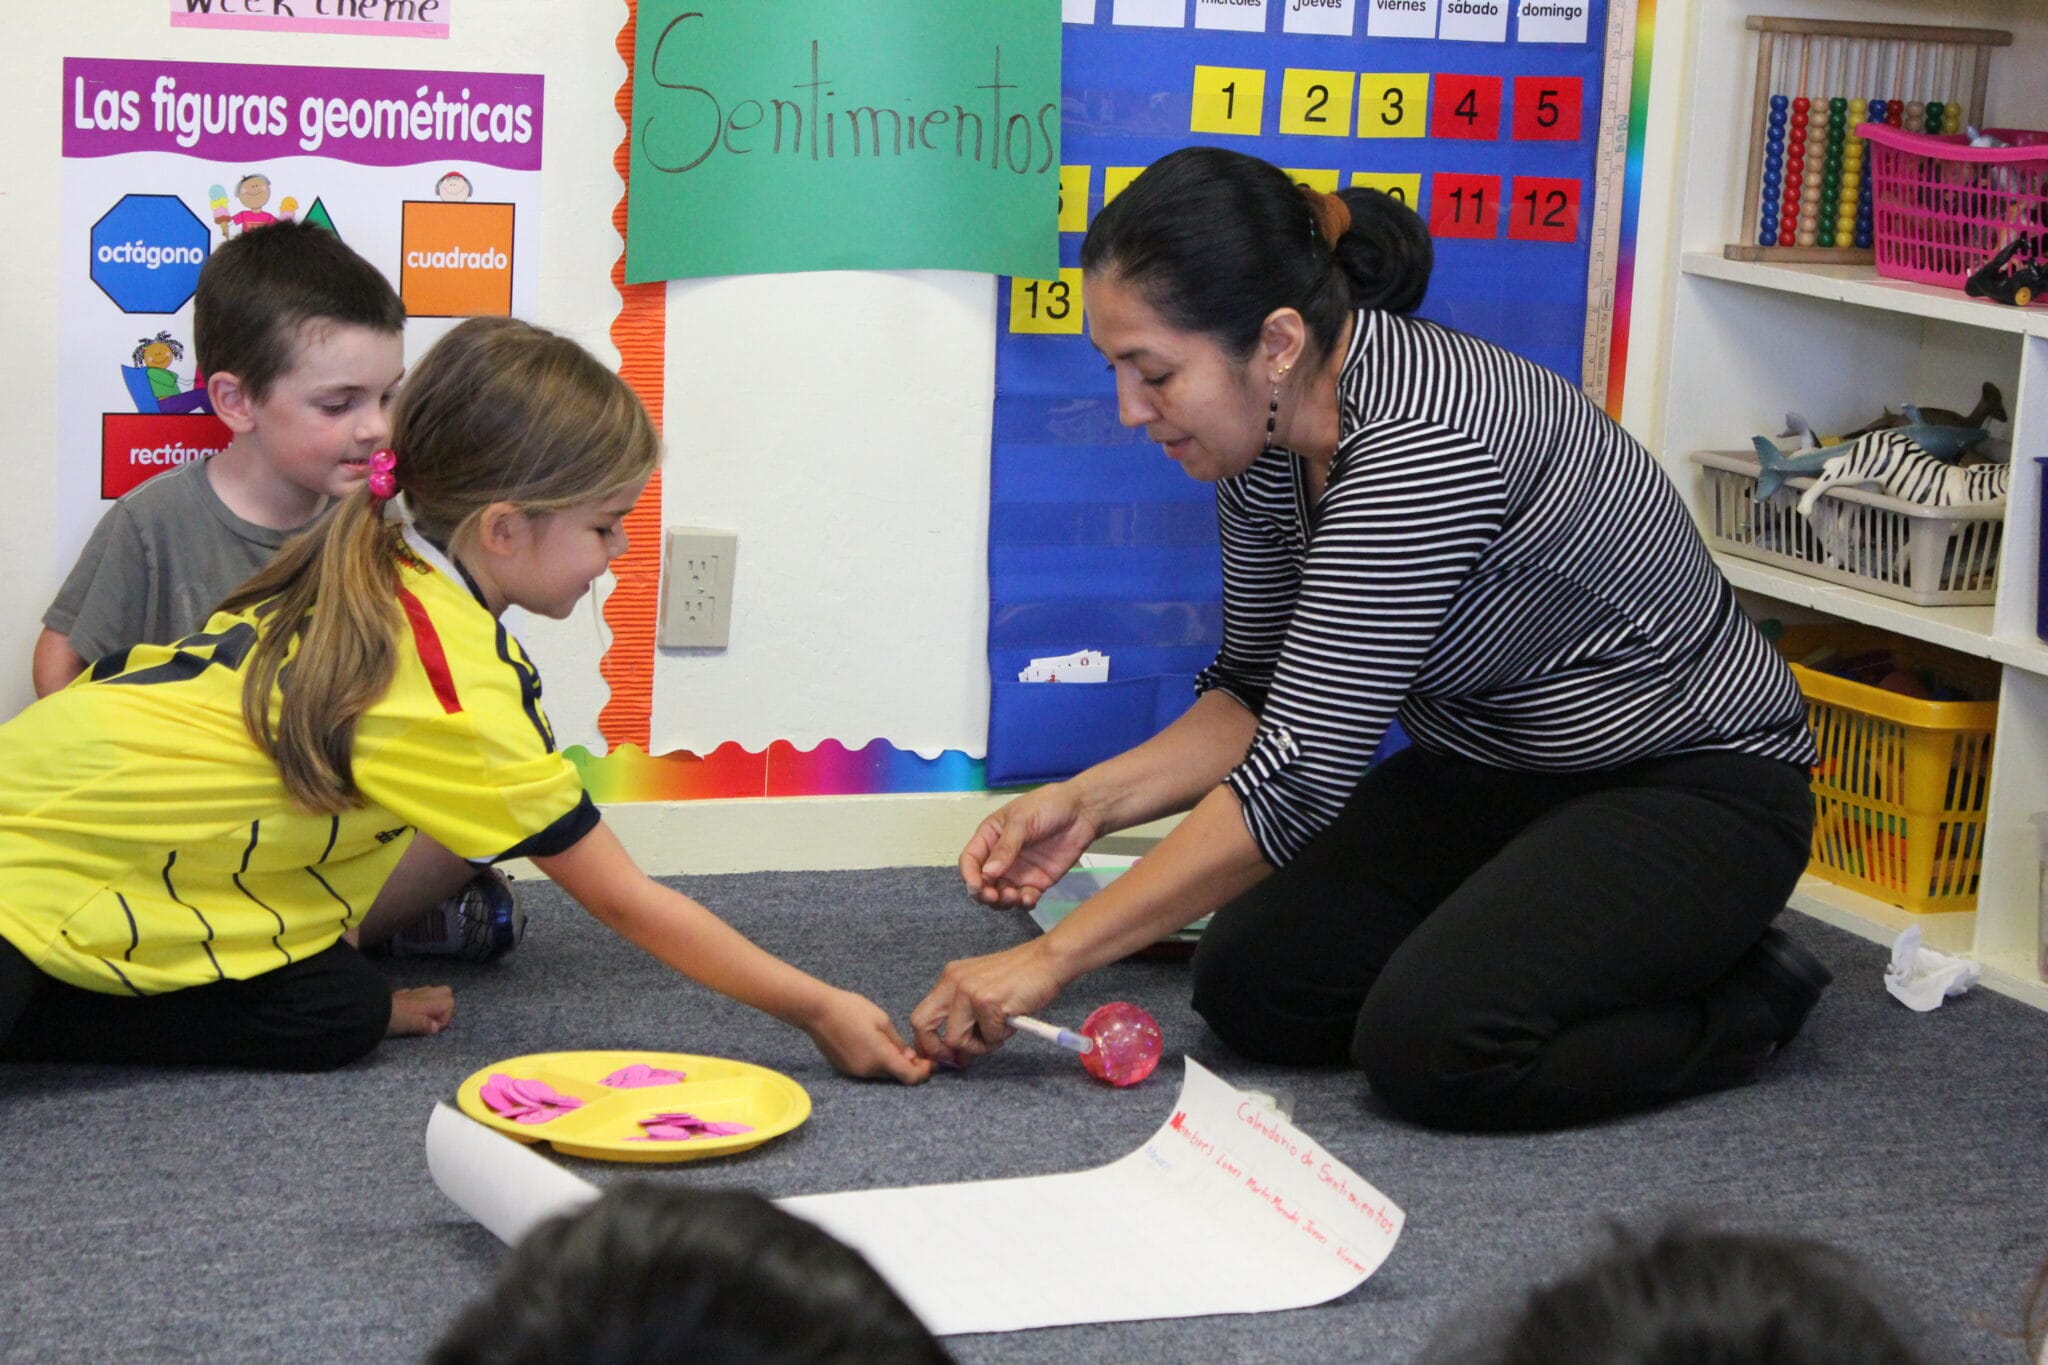 An early educator is playing a game with a student on the carpet